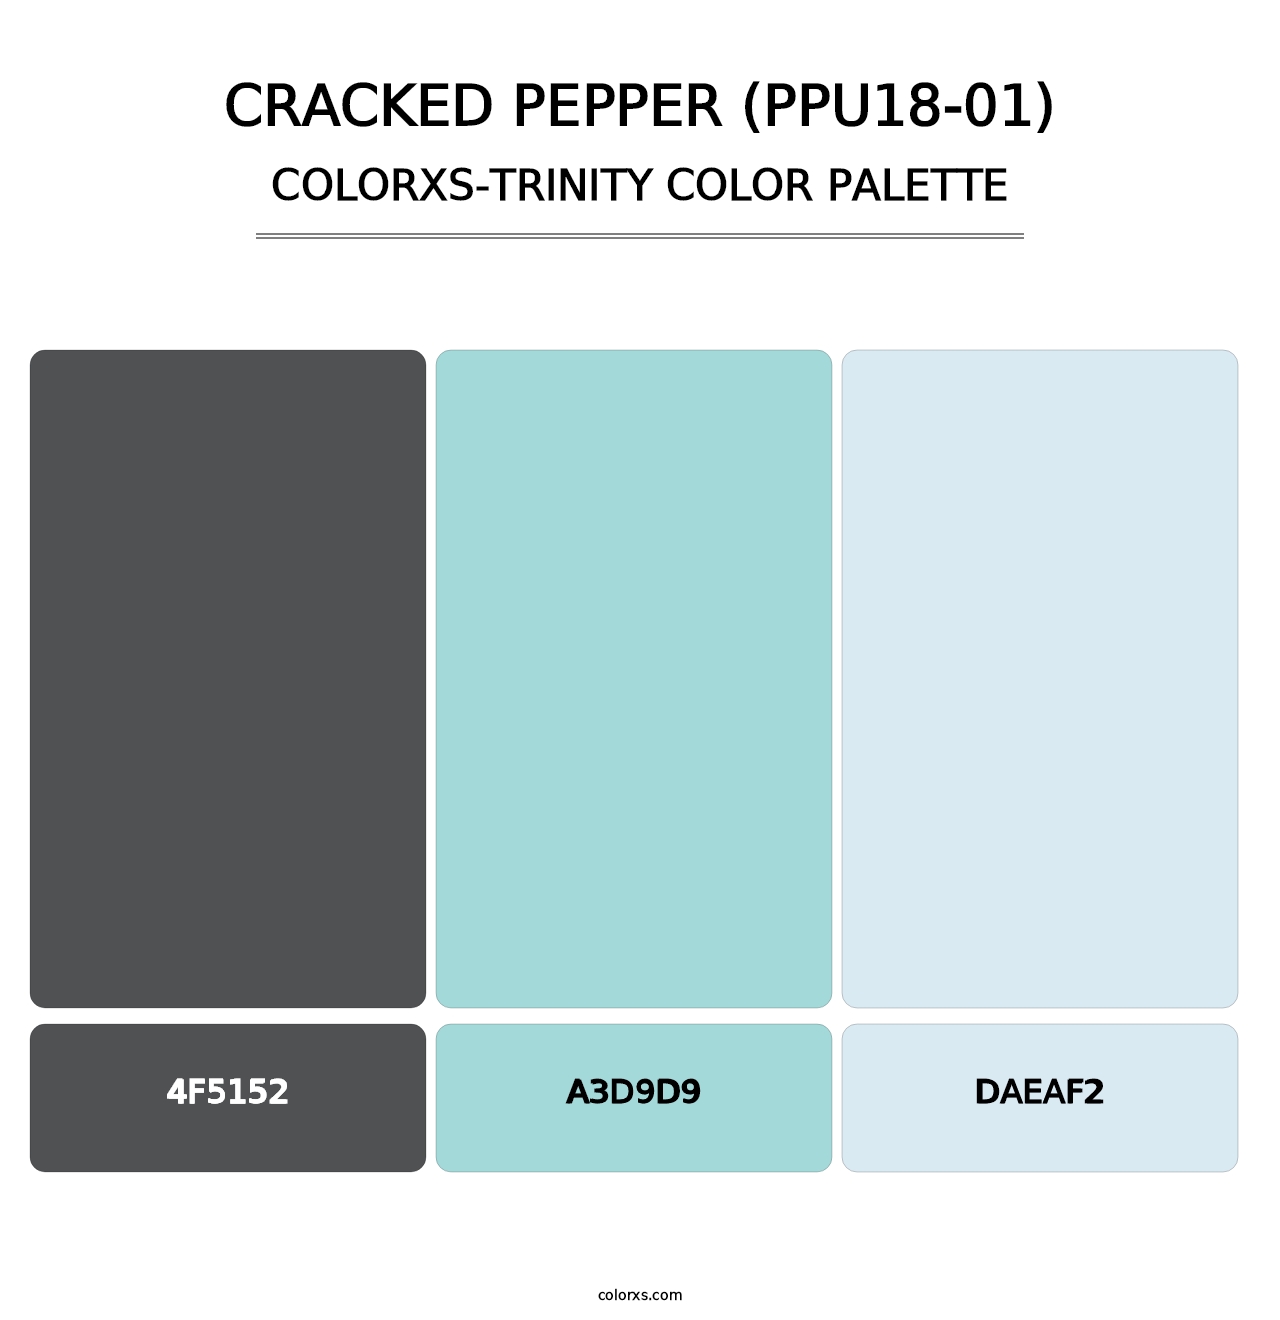 Cracked Pepper (PPU18-01) - Colorxs Trinity Palette